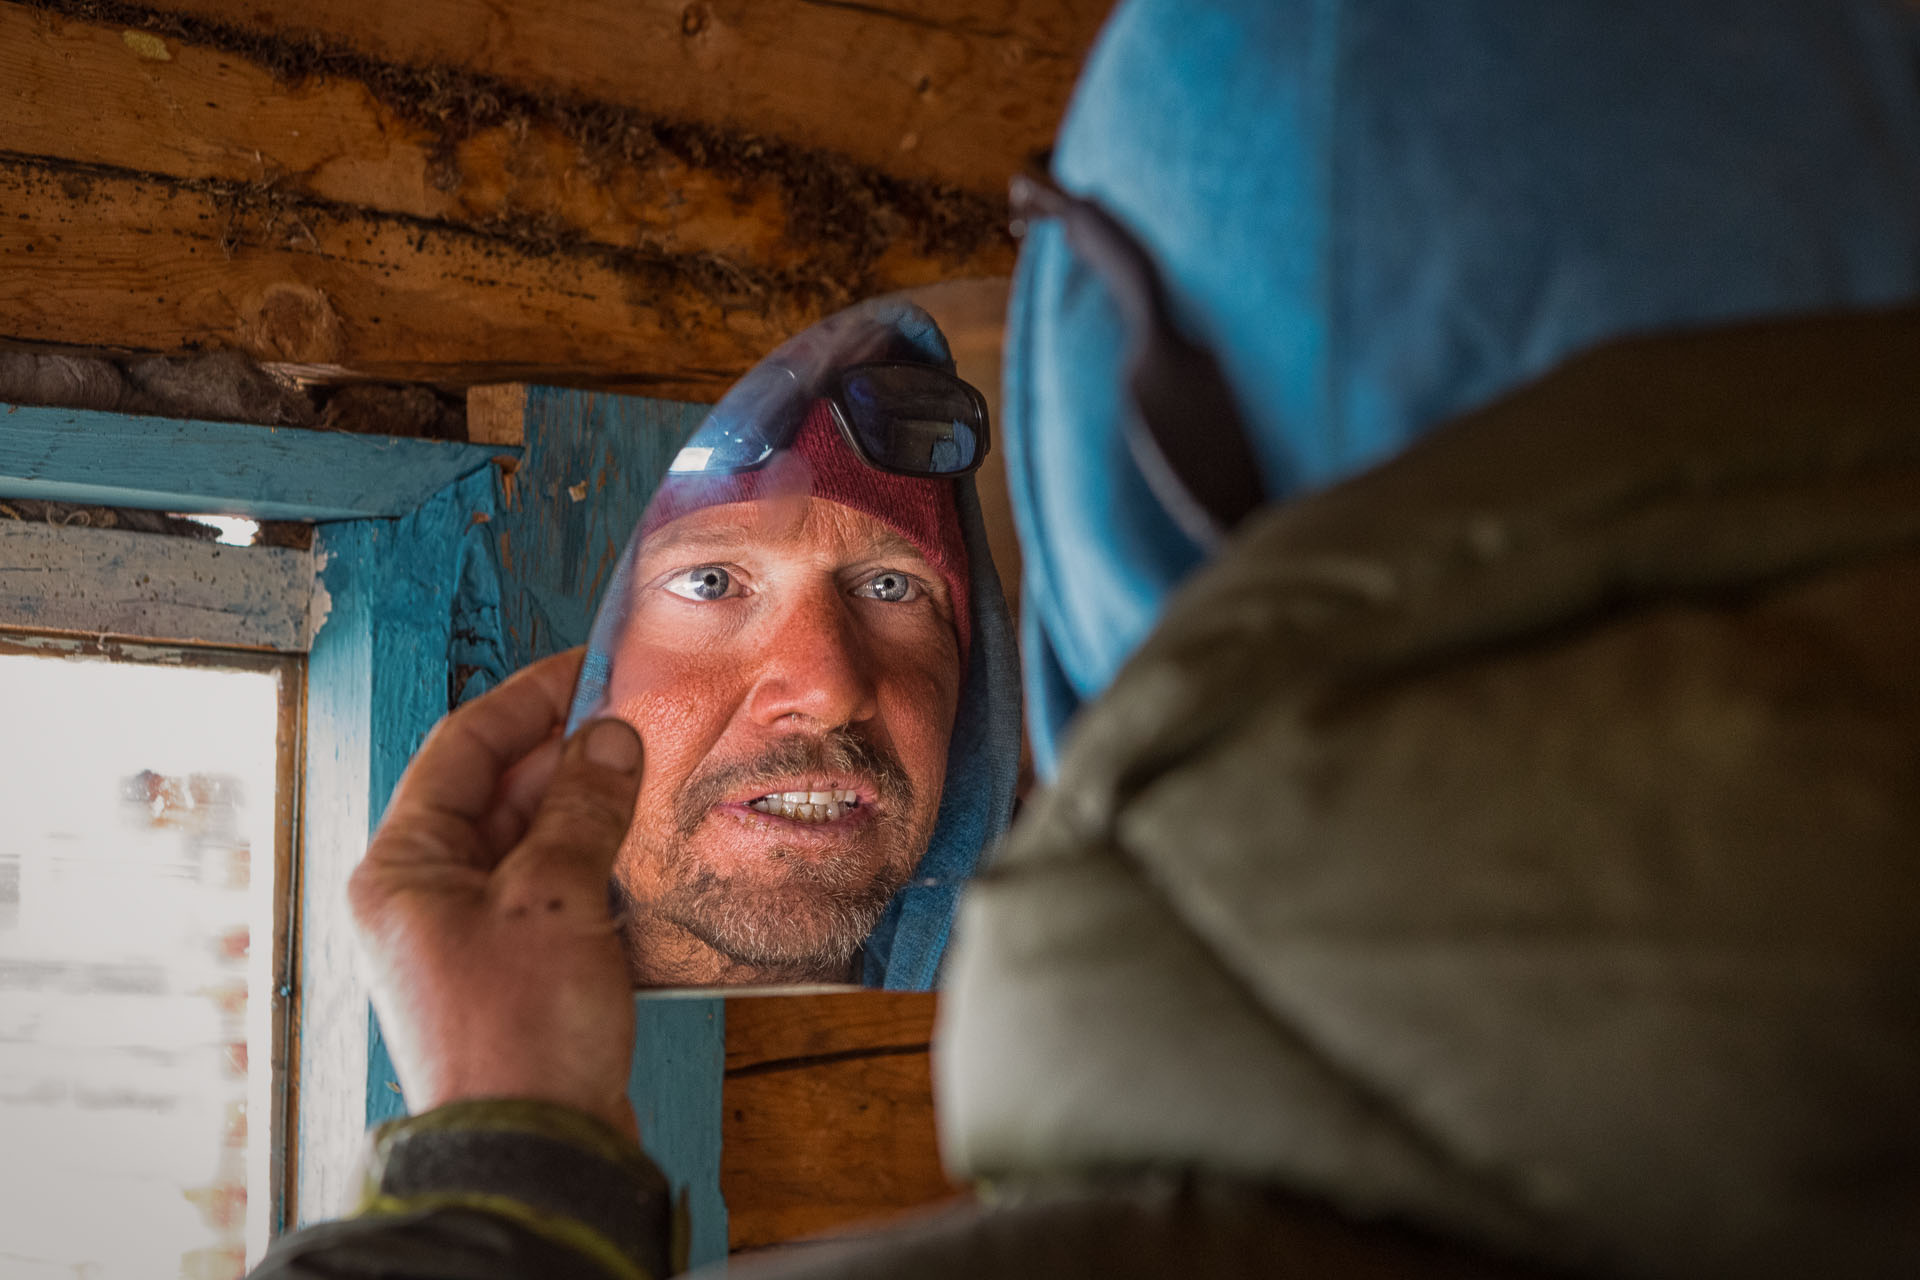 After a few weeks away from reflective surfaces, Forrest McCarthy discovers a piece of mirror at Boojum lodge.